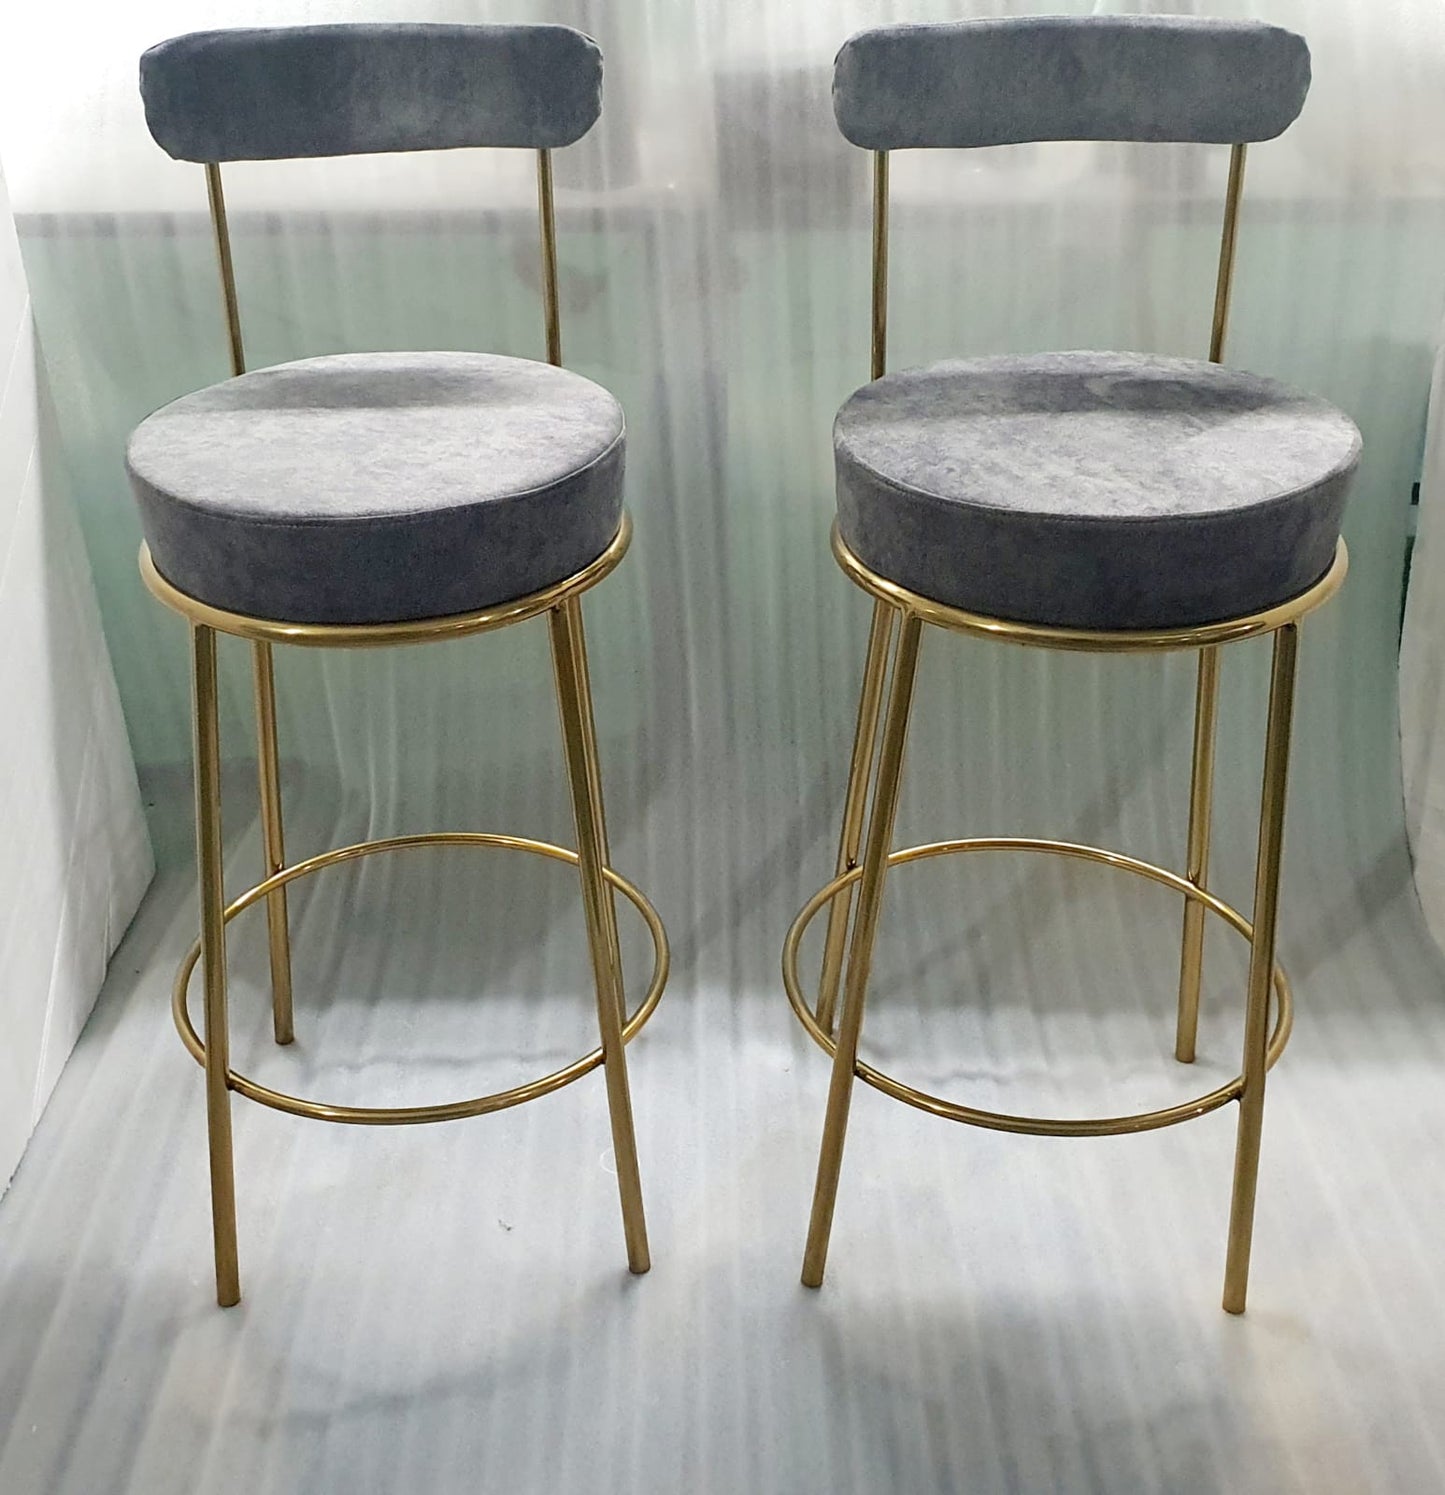 PC Home Decor | Set of 2 Stainless Steel Bar Chairs Set, Grey and Gold